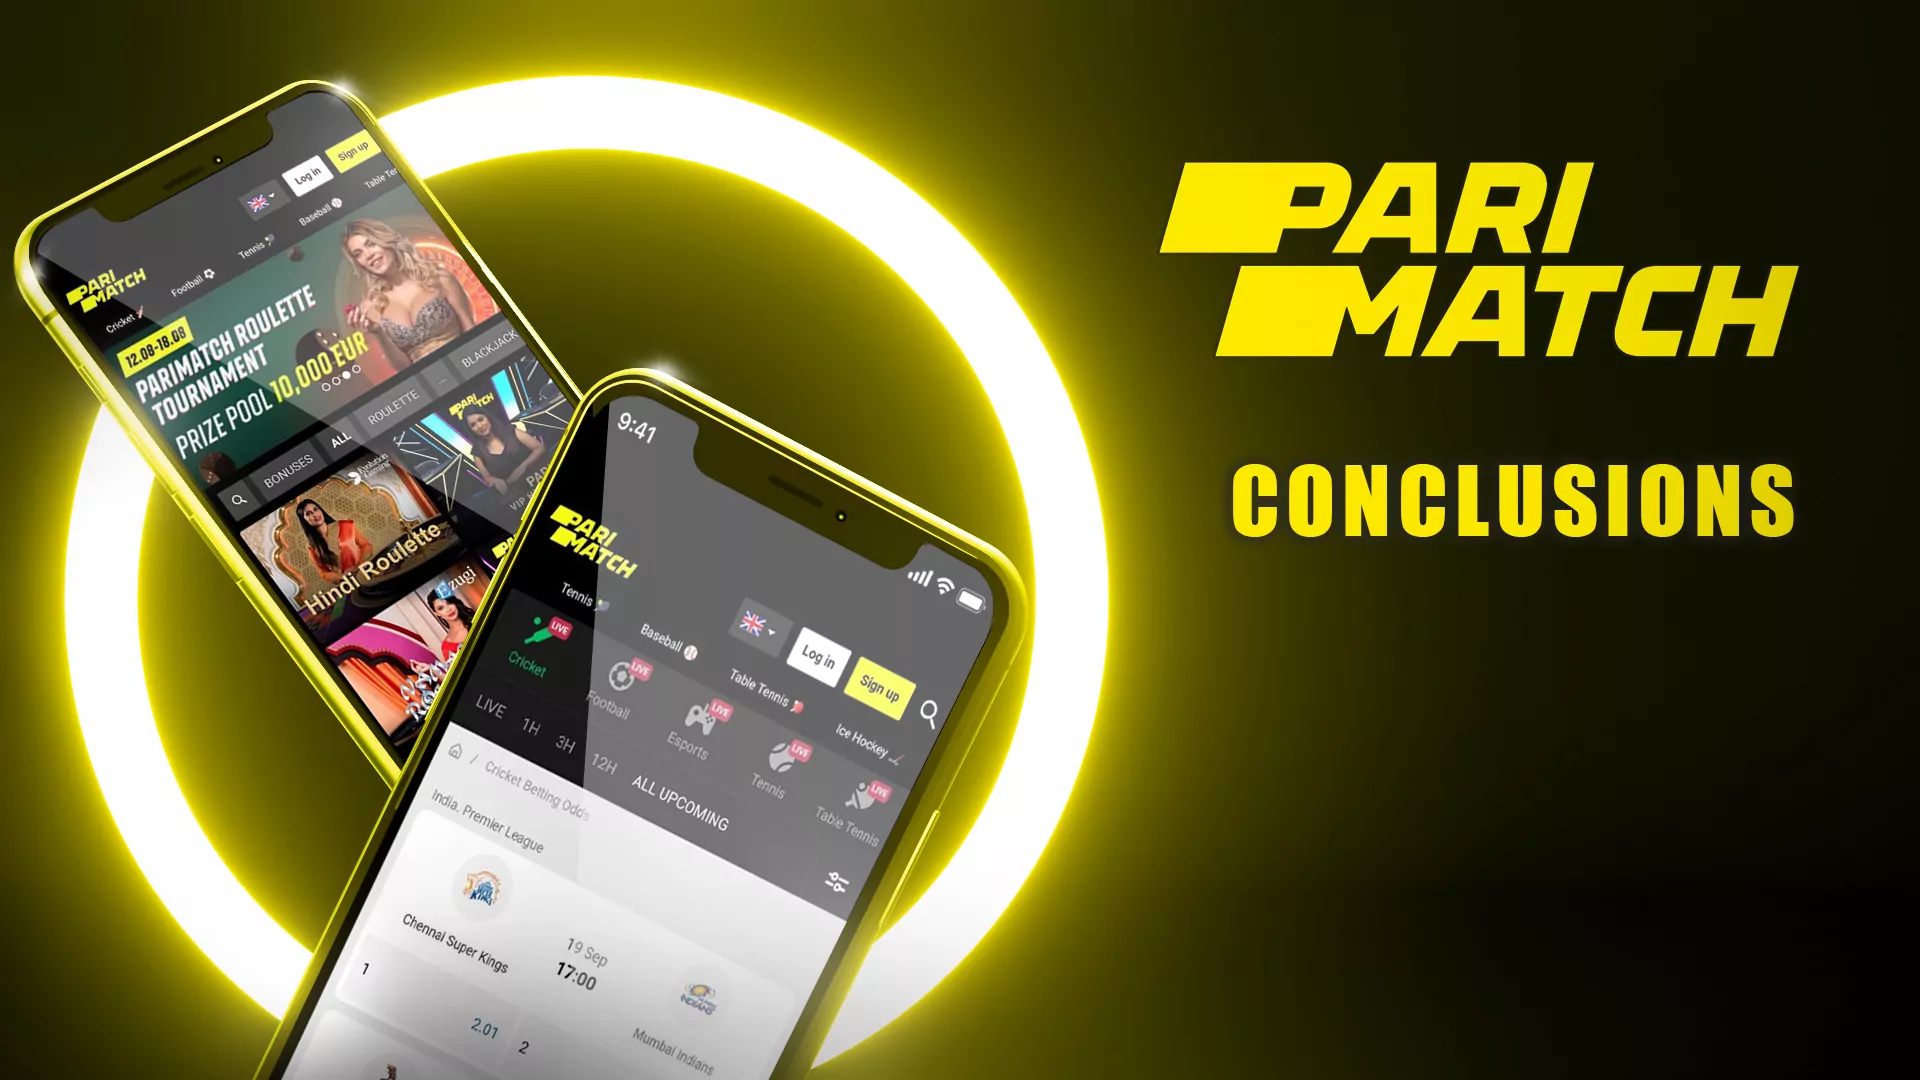 The PariMatch team developed a great mobile app for iOS and Android with lots of functions and features.